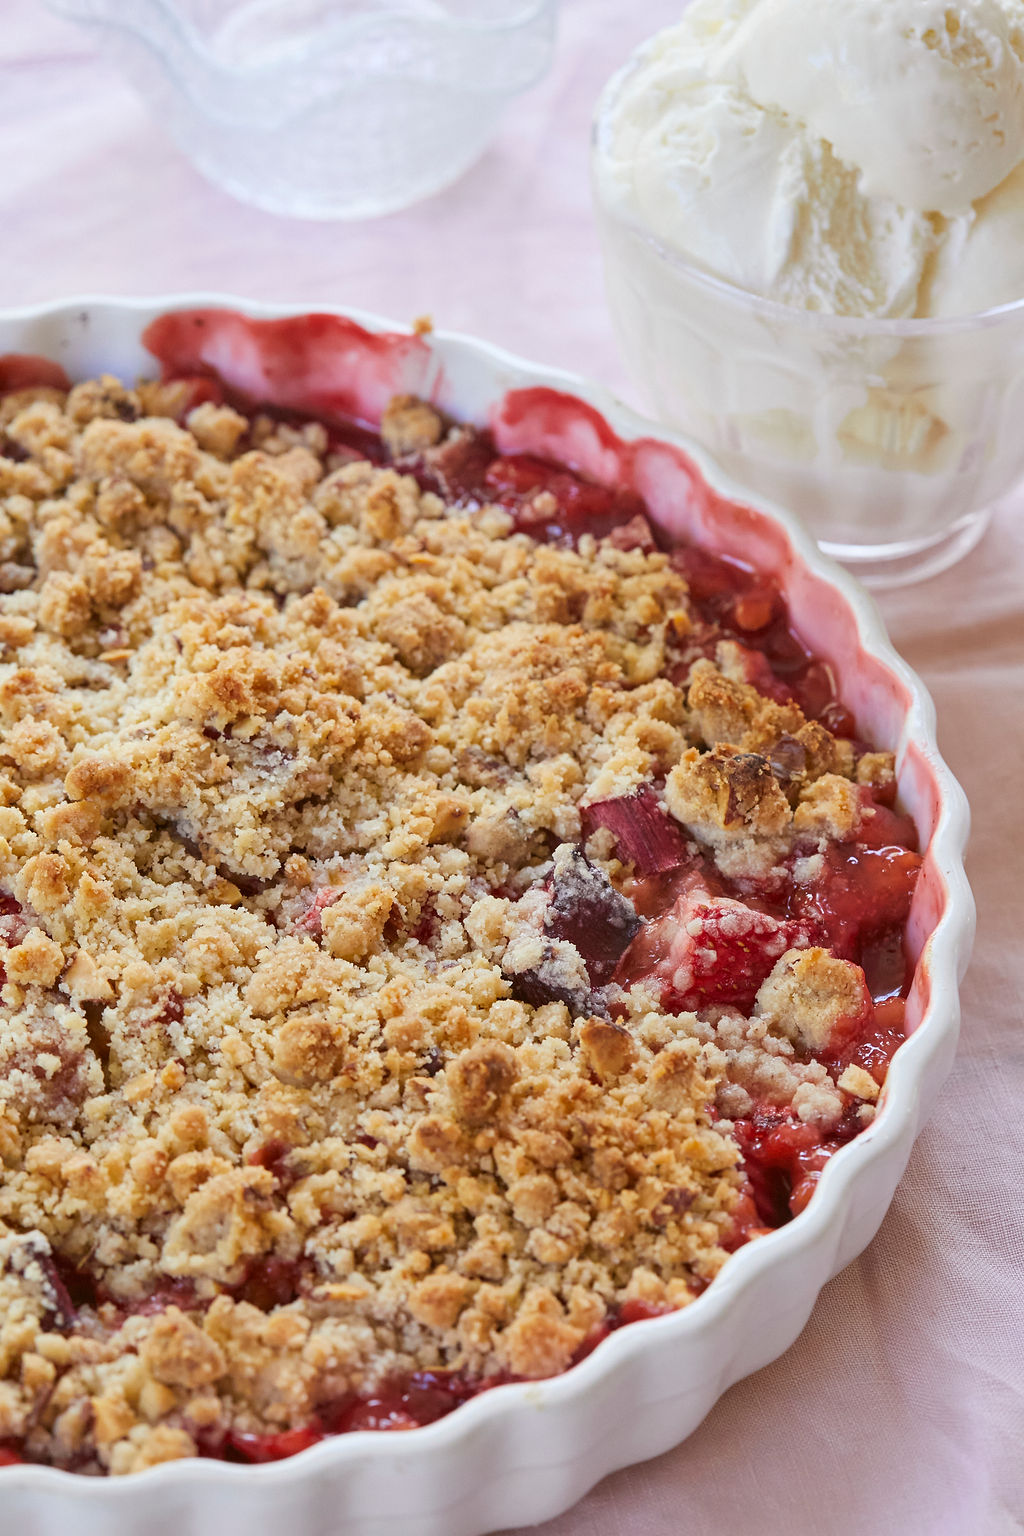 A close up of Strawberry Rhubarb Crisp, to show texture and color when finished.